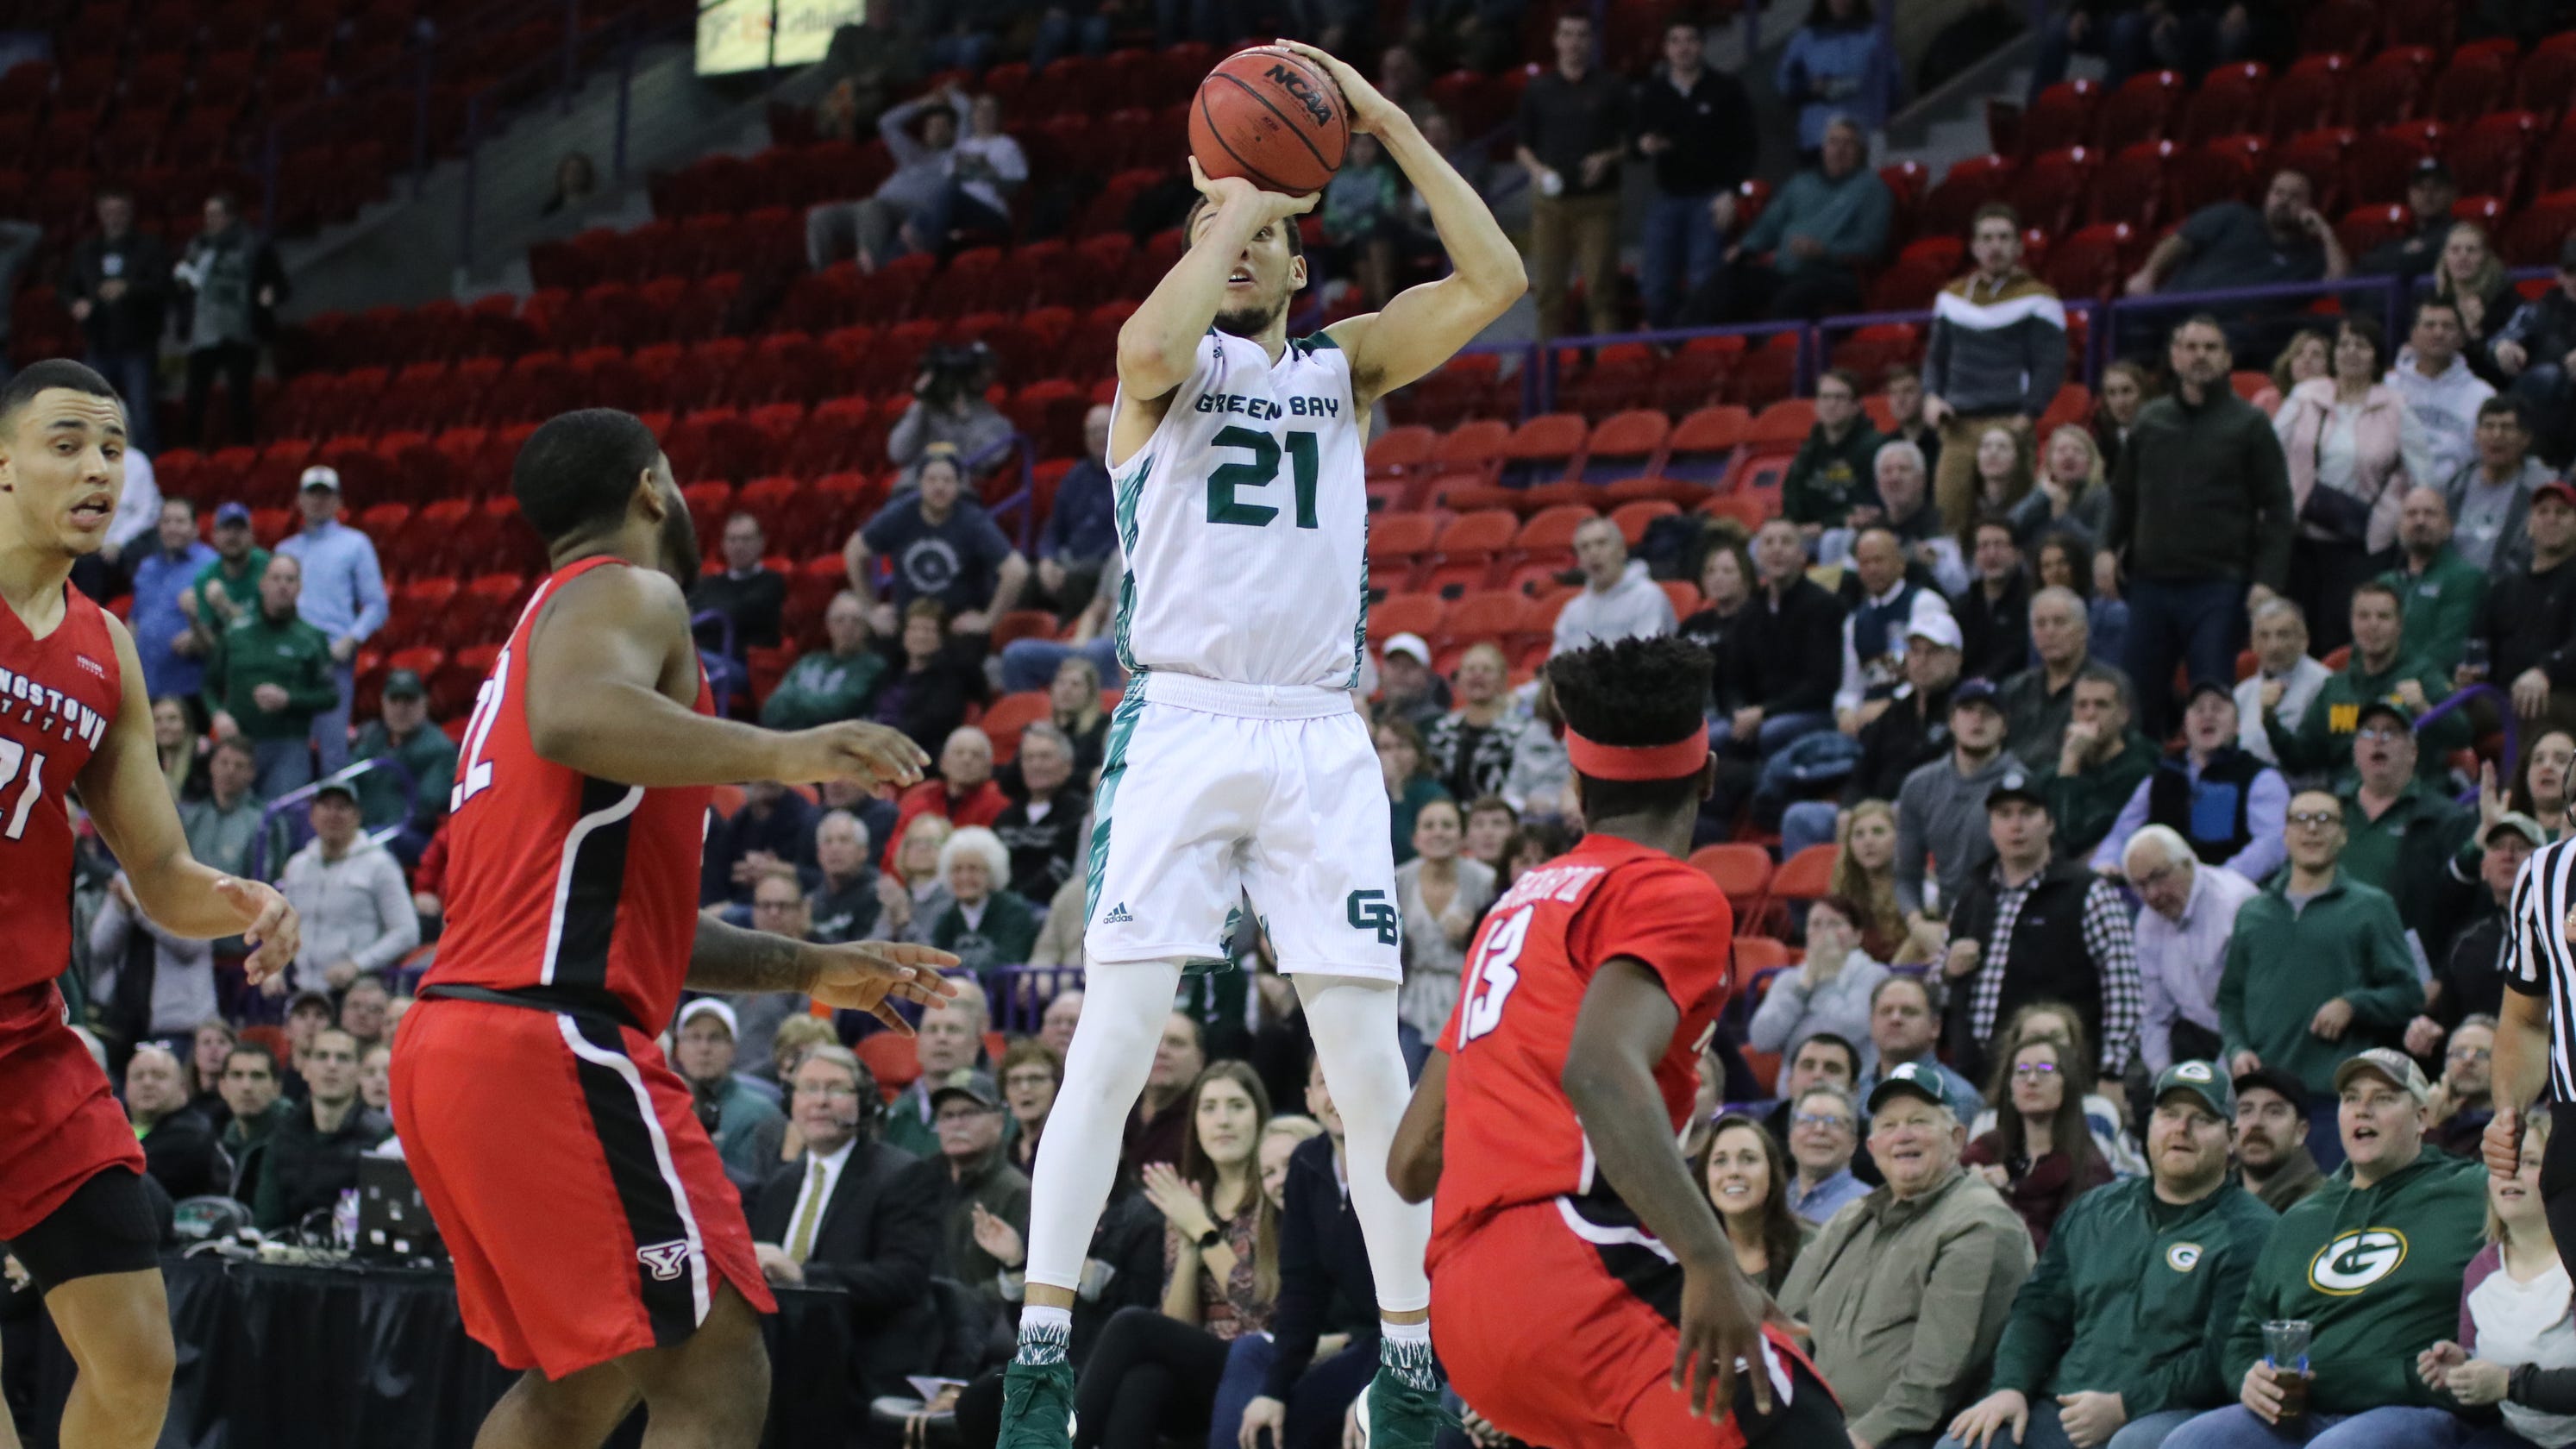 Uwgb Men Phoenix Comes Back To Beat Youngstown State